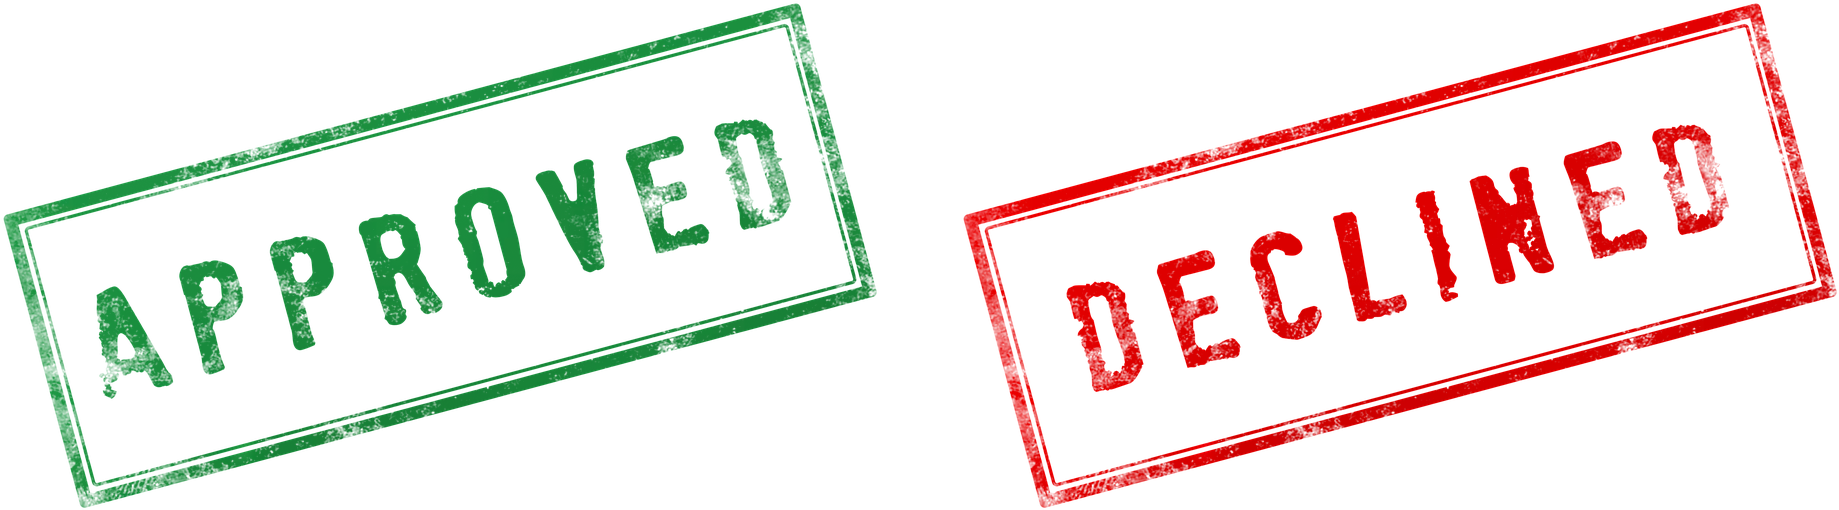 Approved Denied Stamps - Approve Decline (1920x655)